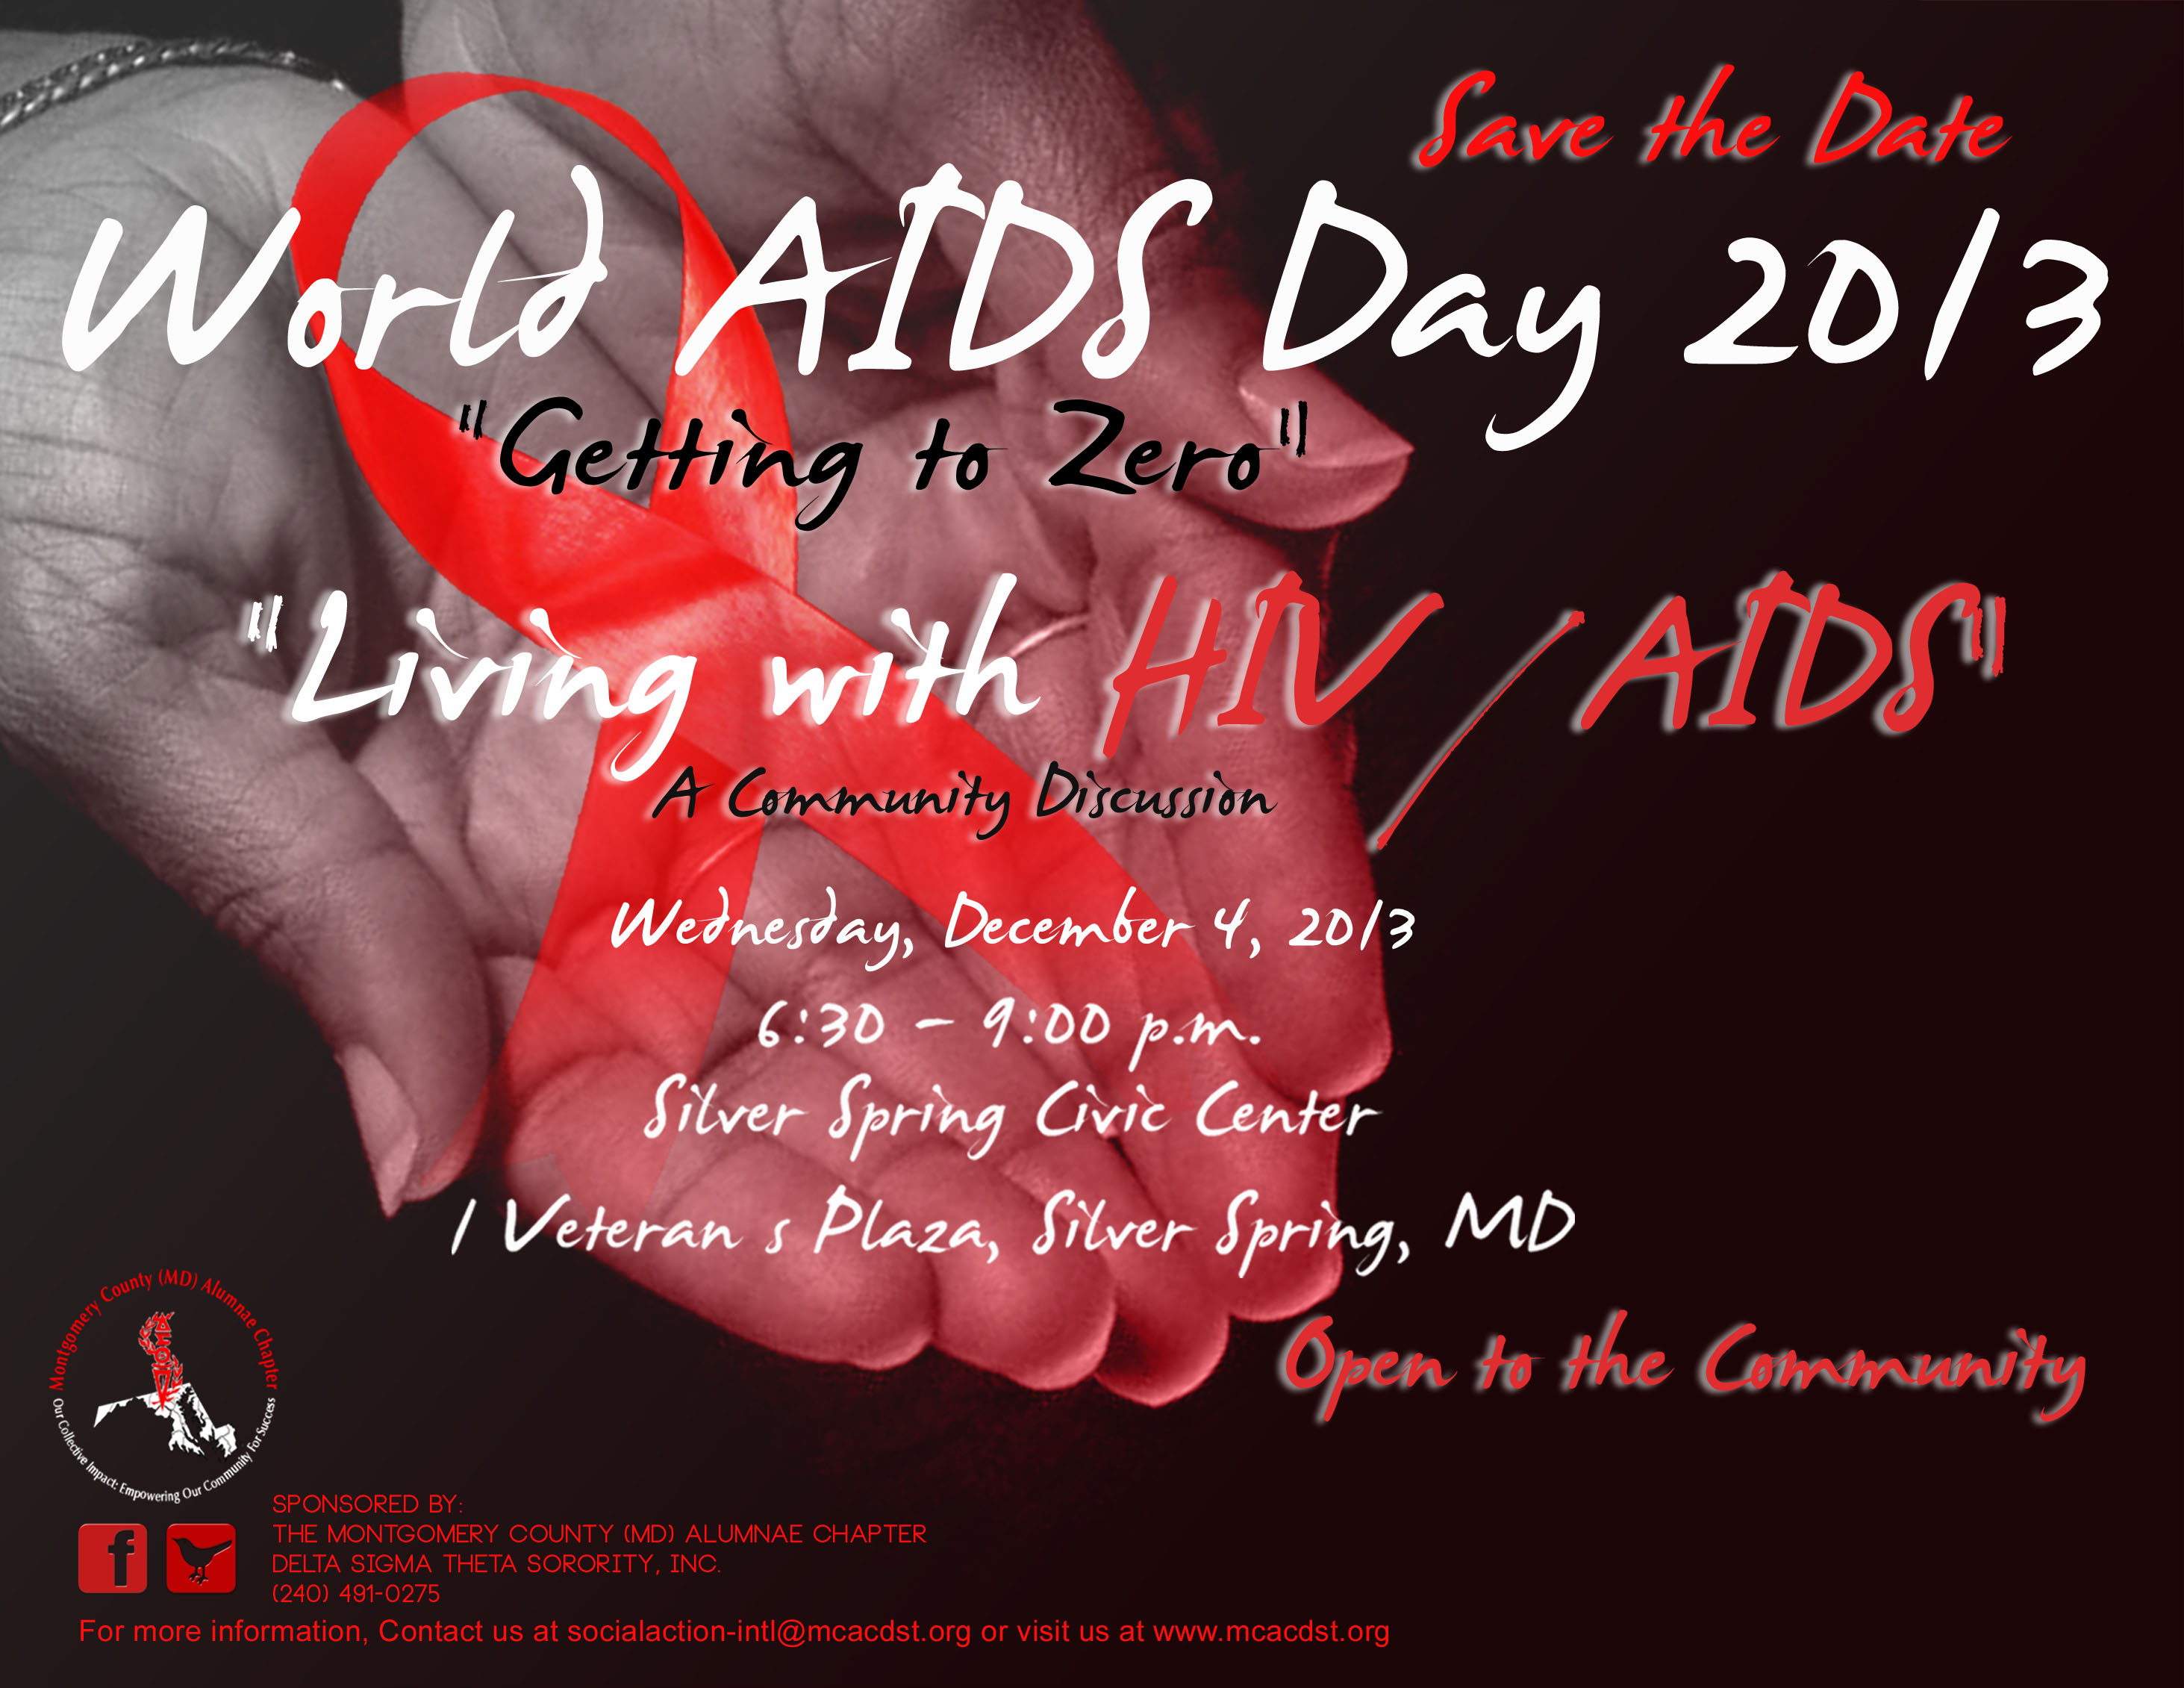 MCAC World AIDS Day Youre Invited: World AIDS Day Symposium Getting to Zero